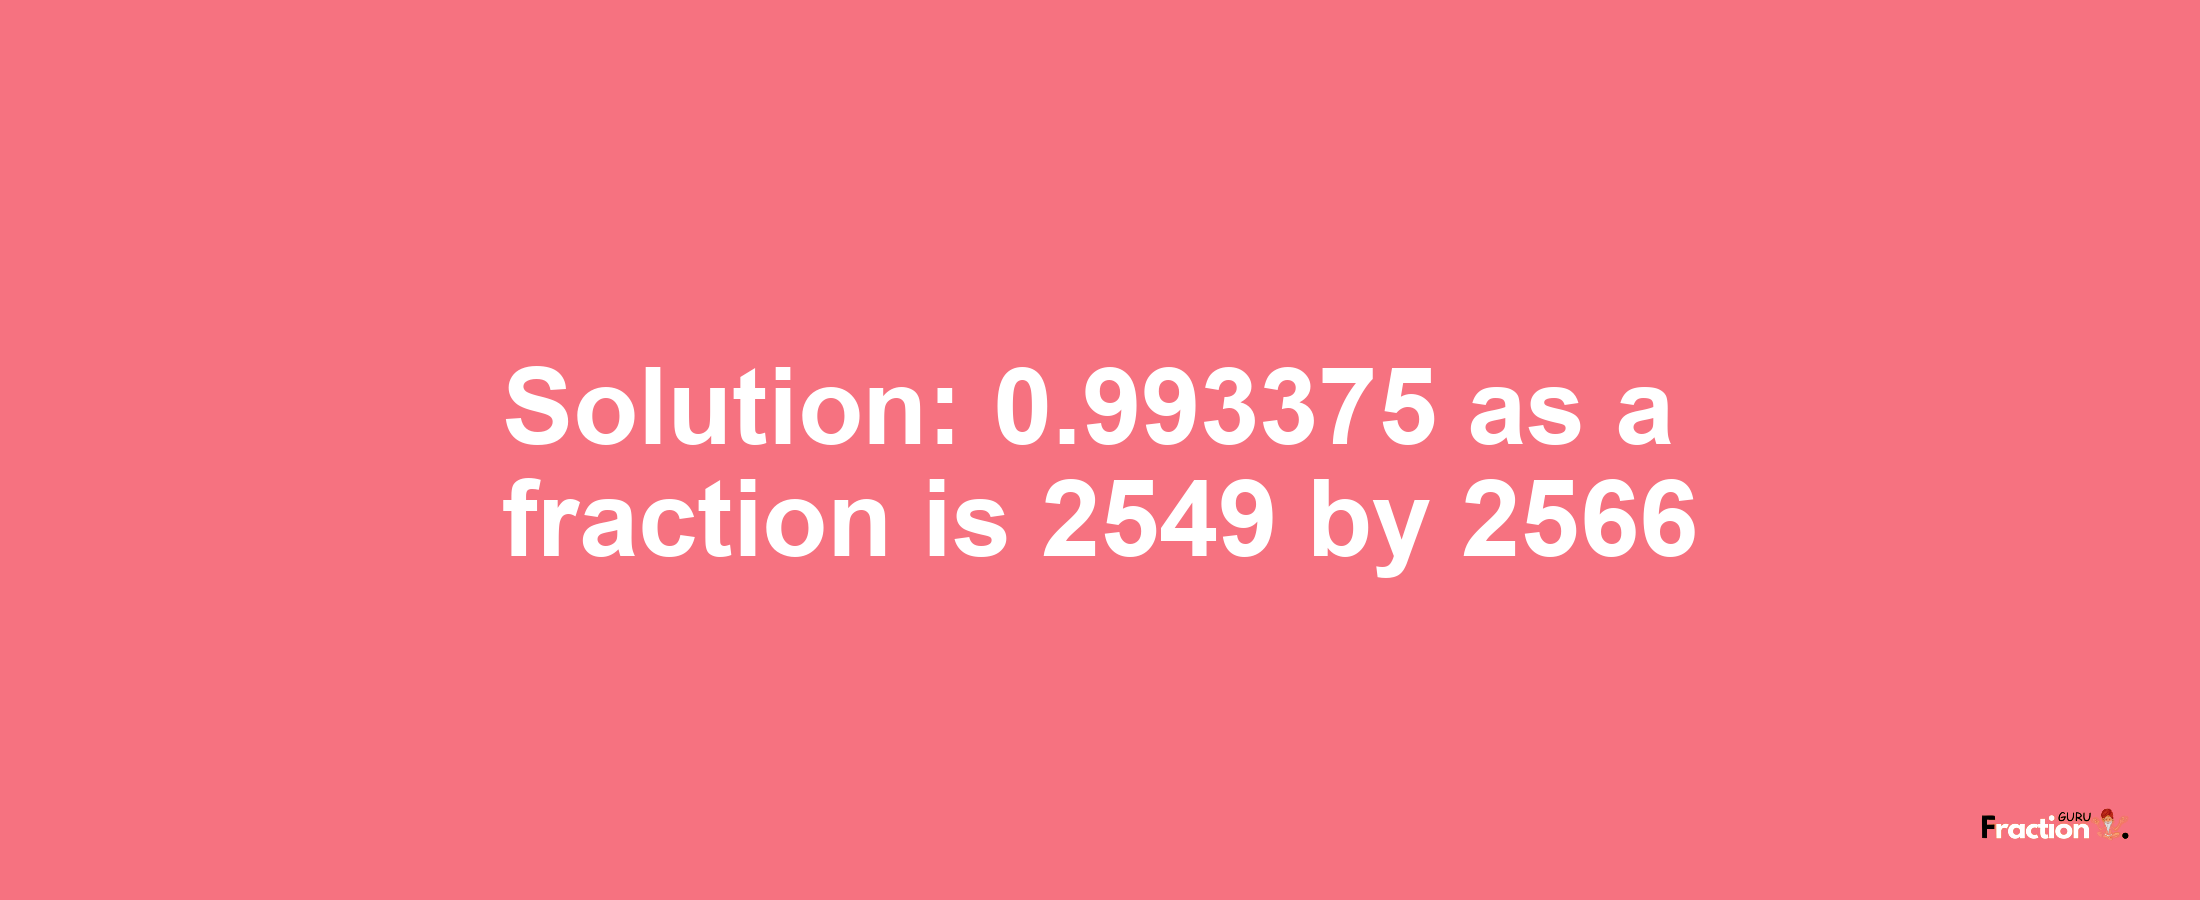 Solution:0.993375 as a fraction is 2549/2566